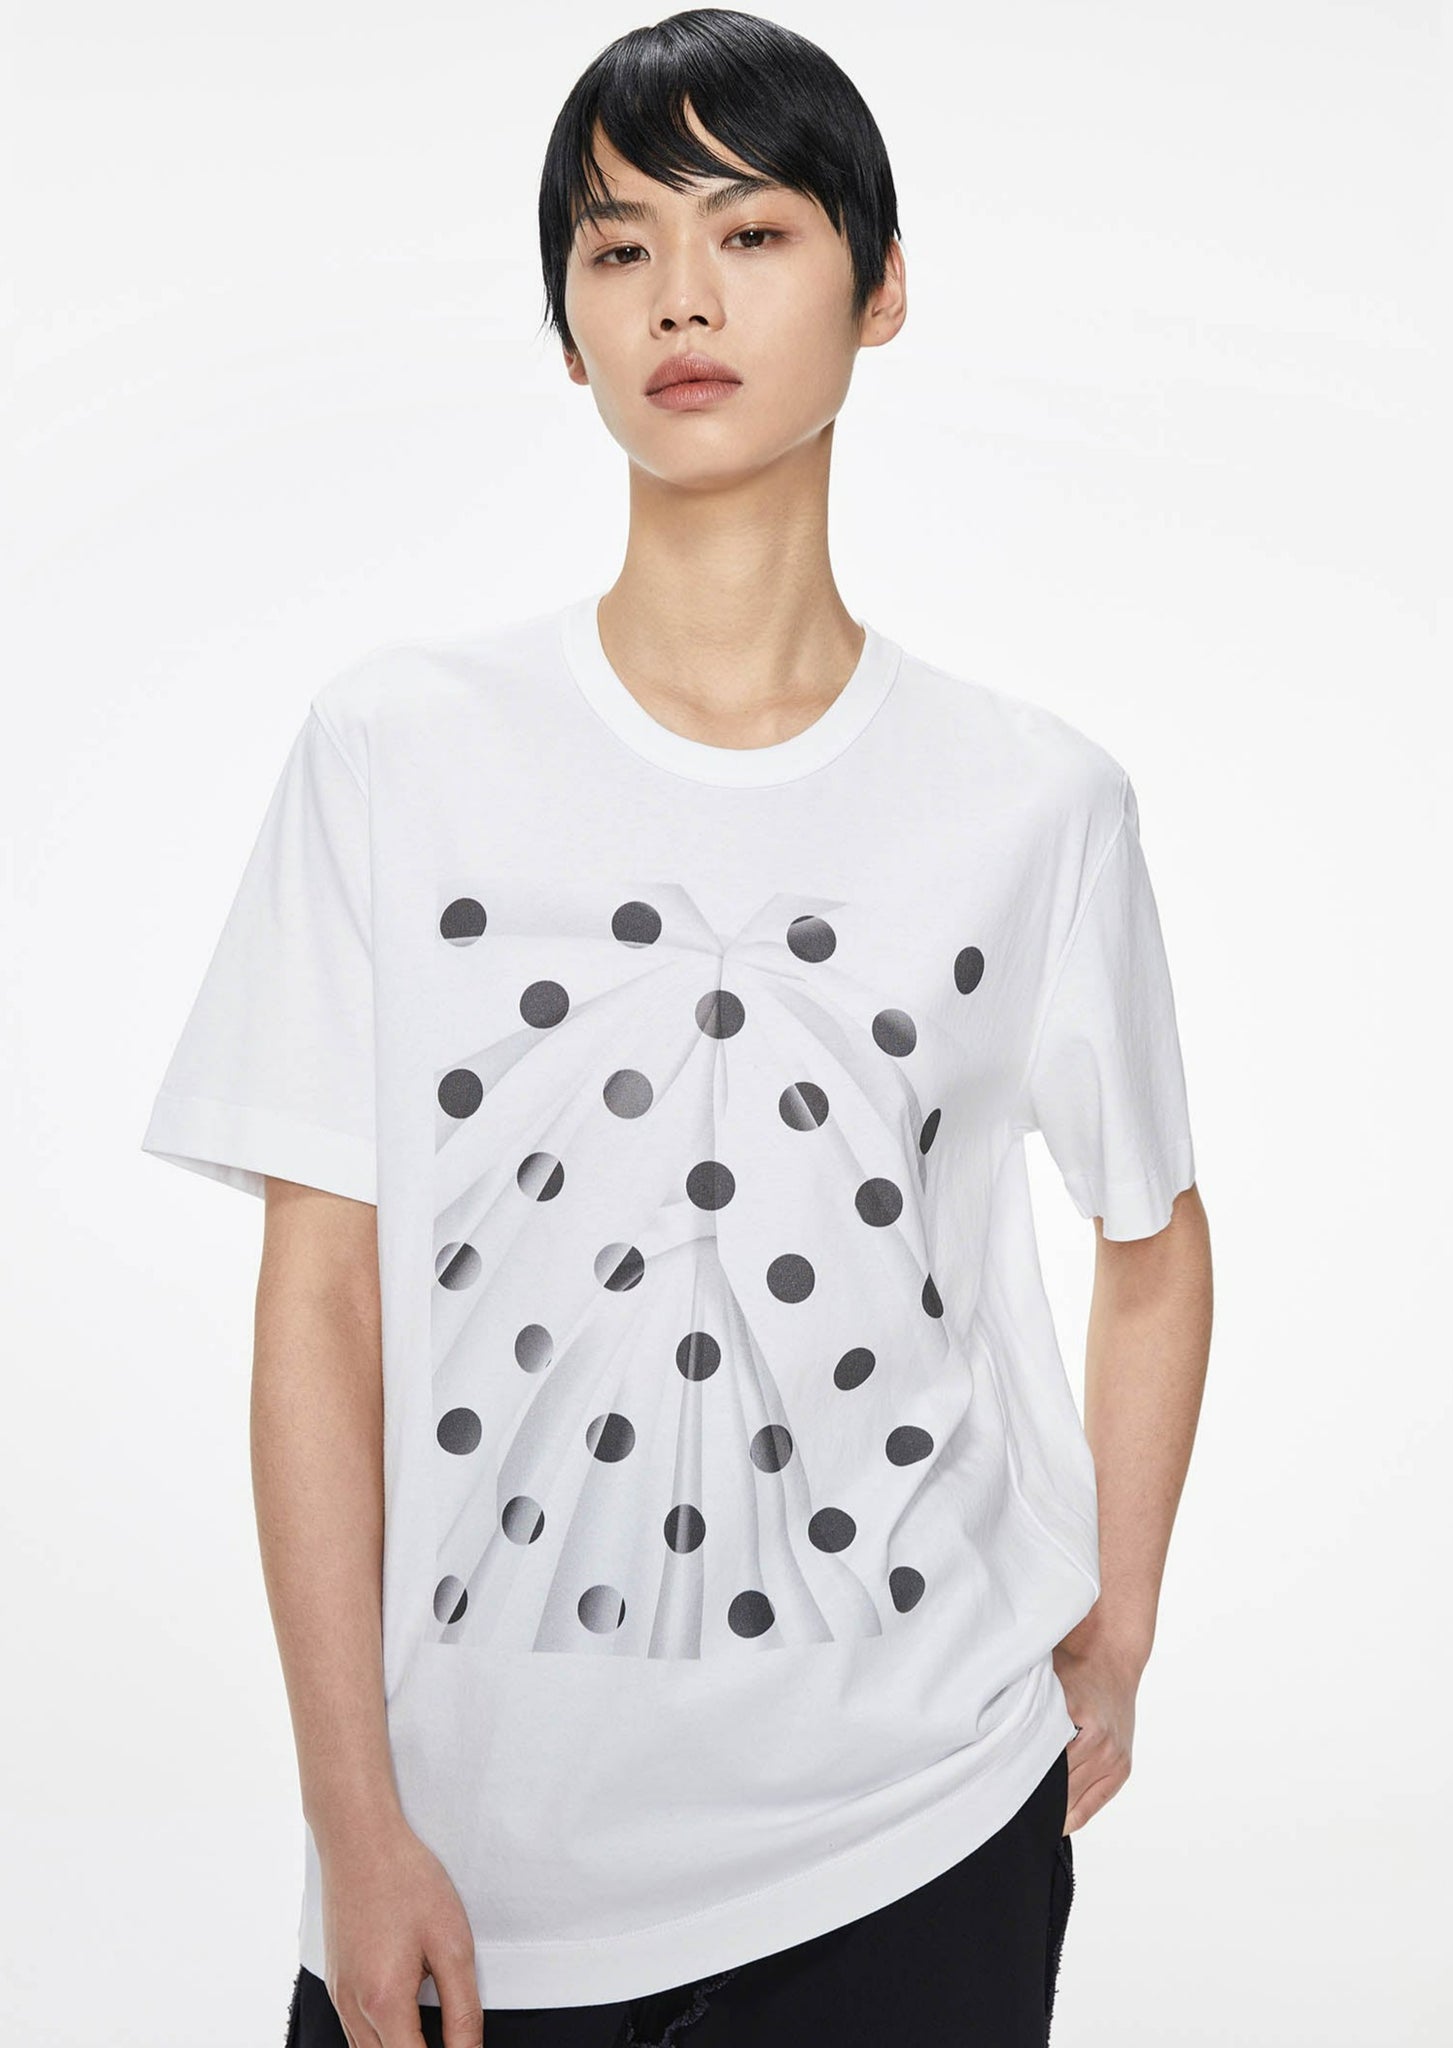 T-Shirt / JNBY Loose Fit Printed Short Sleeve Cotton T-Shirt